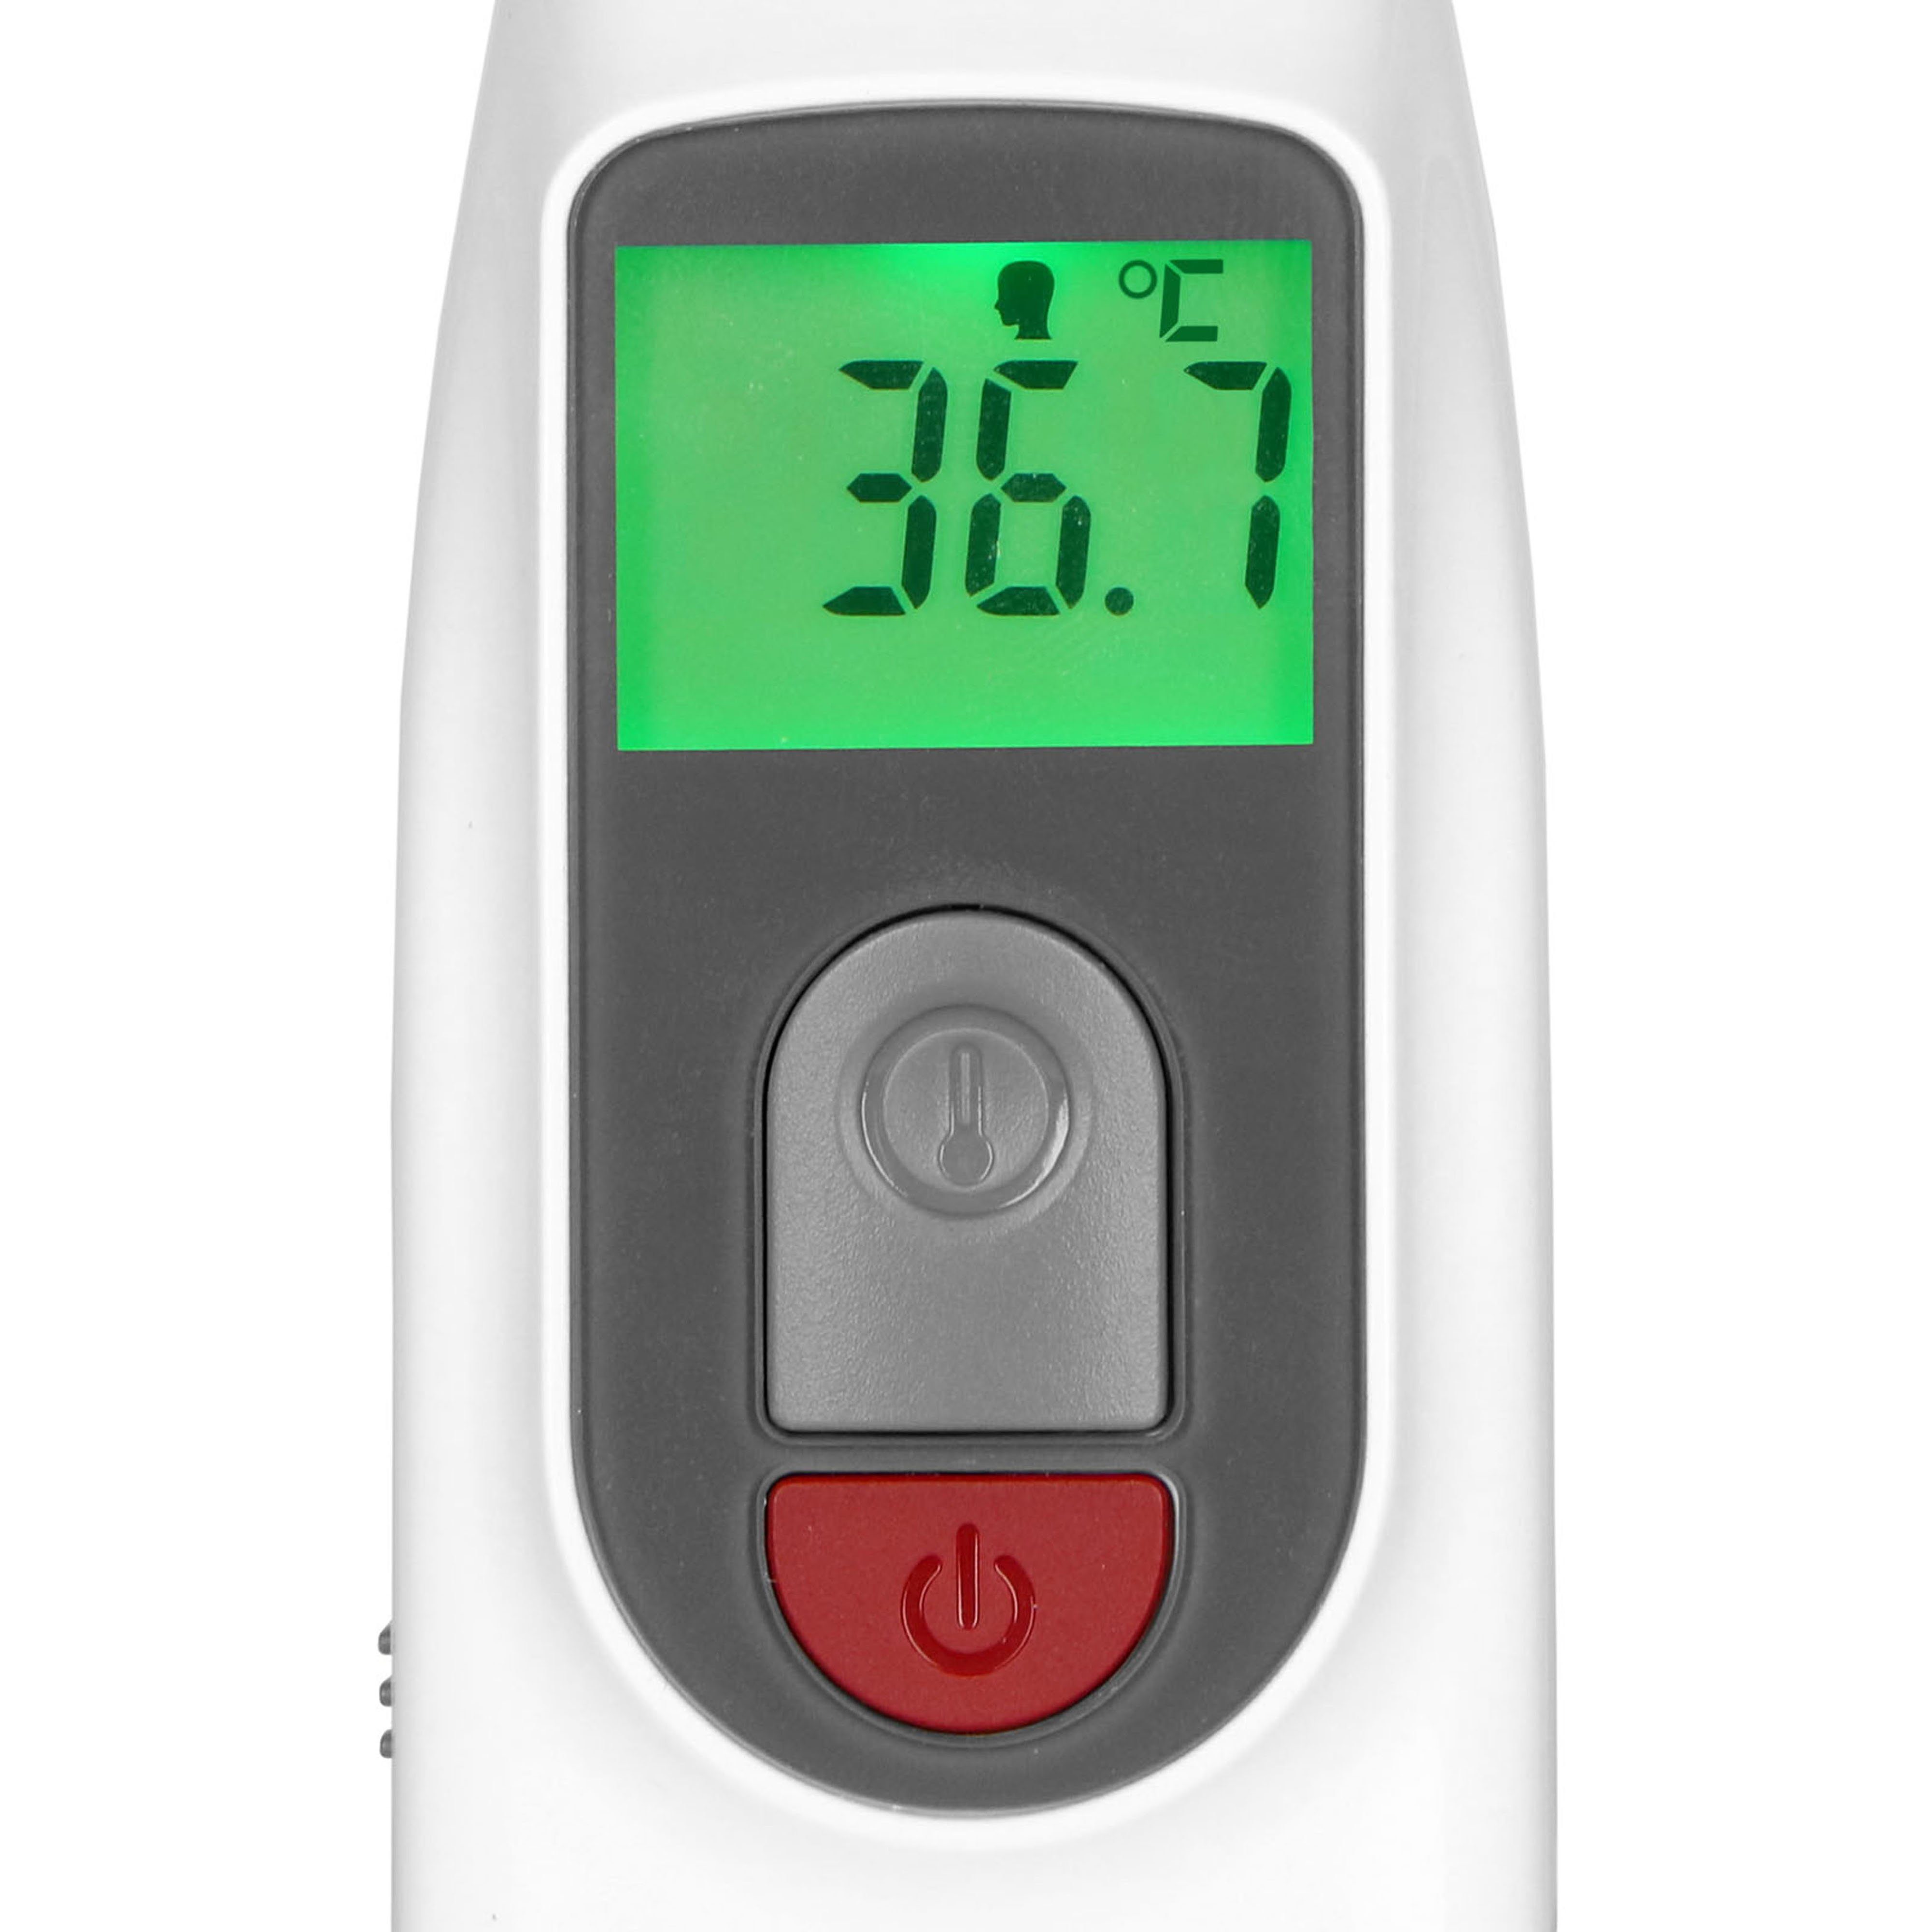 Alecto Home Alecto Fieberthermometer BC38, Infrarot-Stirnthermometer 1-tlg